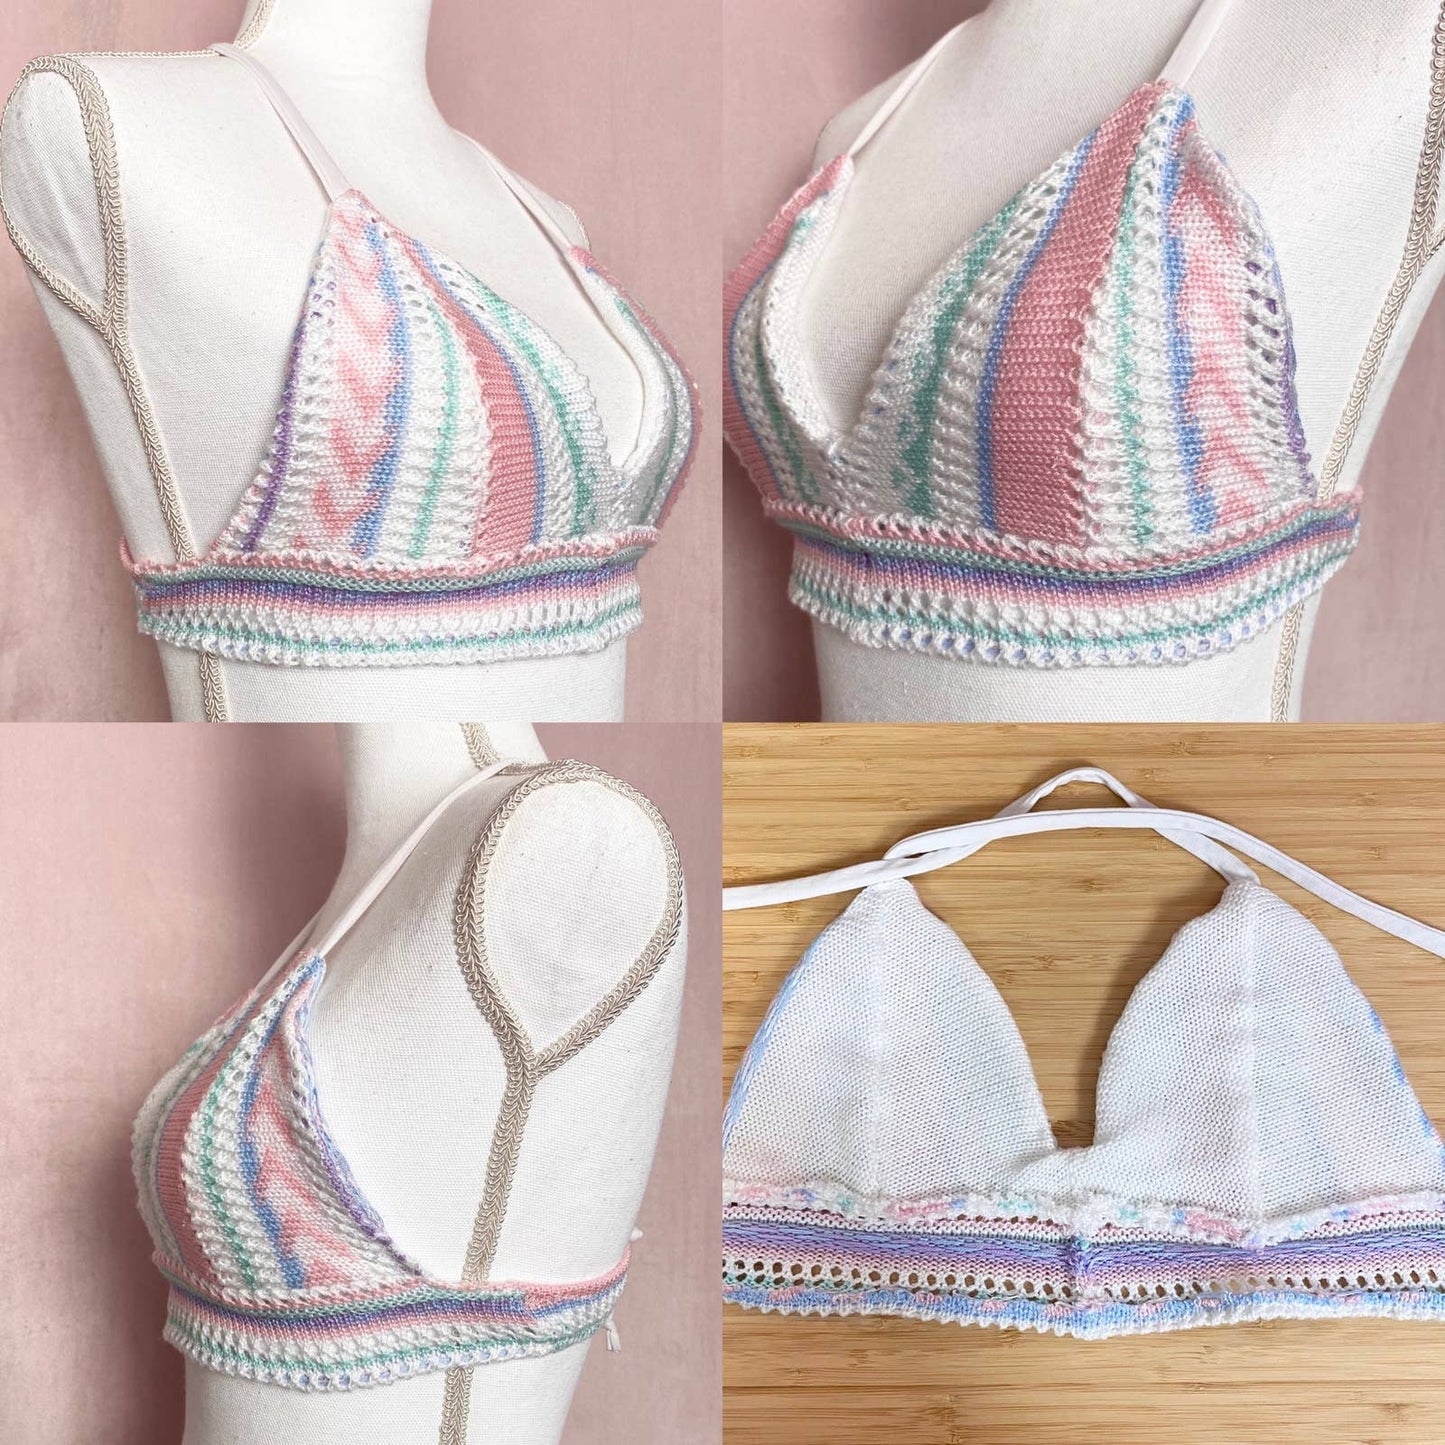 Upcycled Acrylic Knit Bralette Crop Top, Size Small